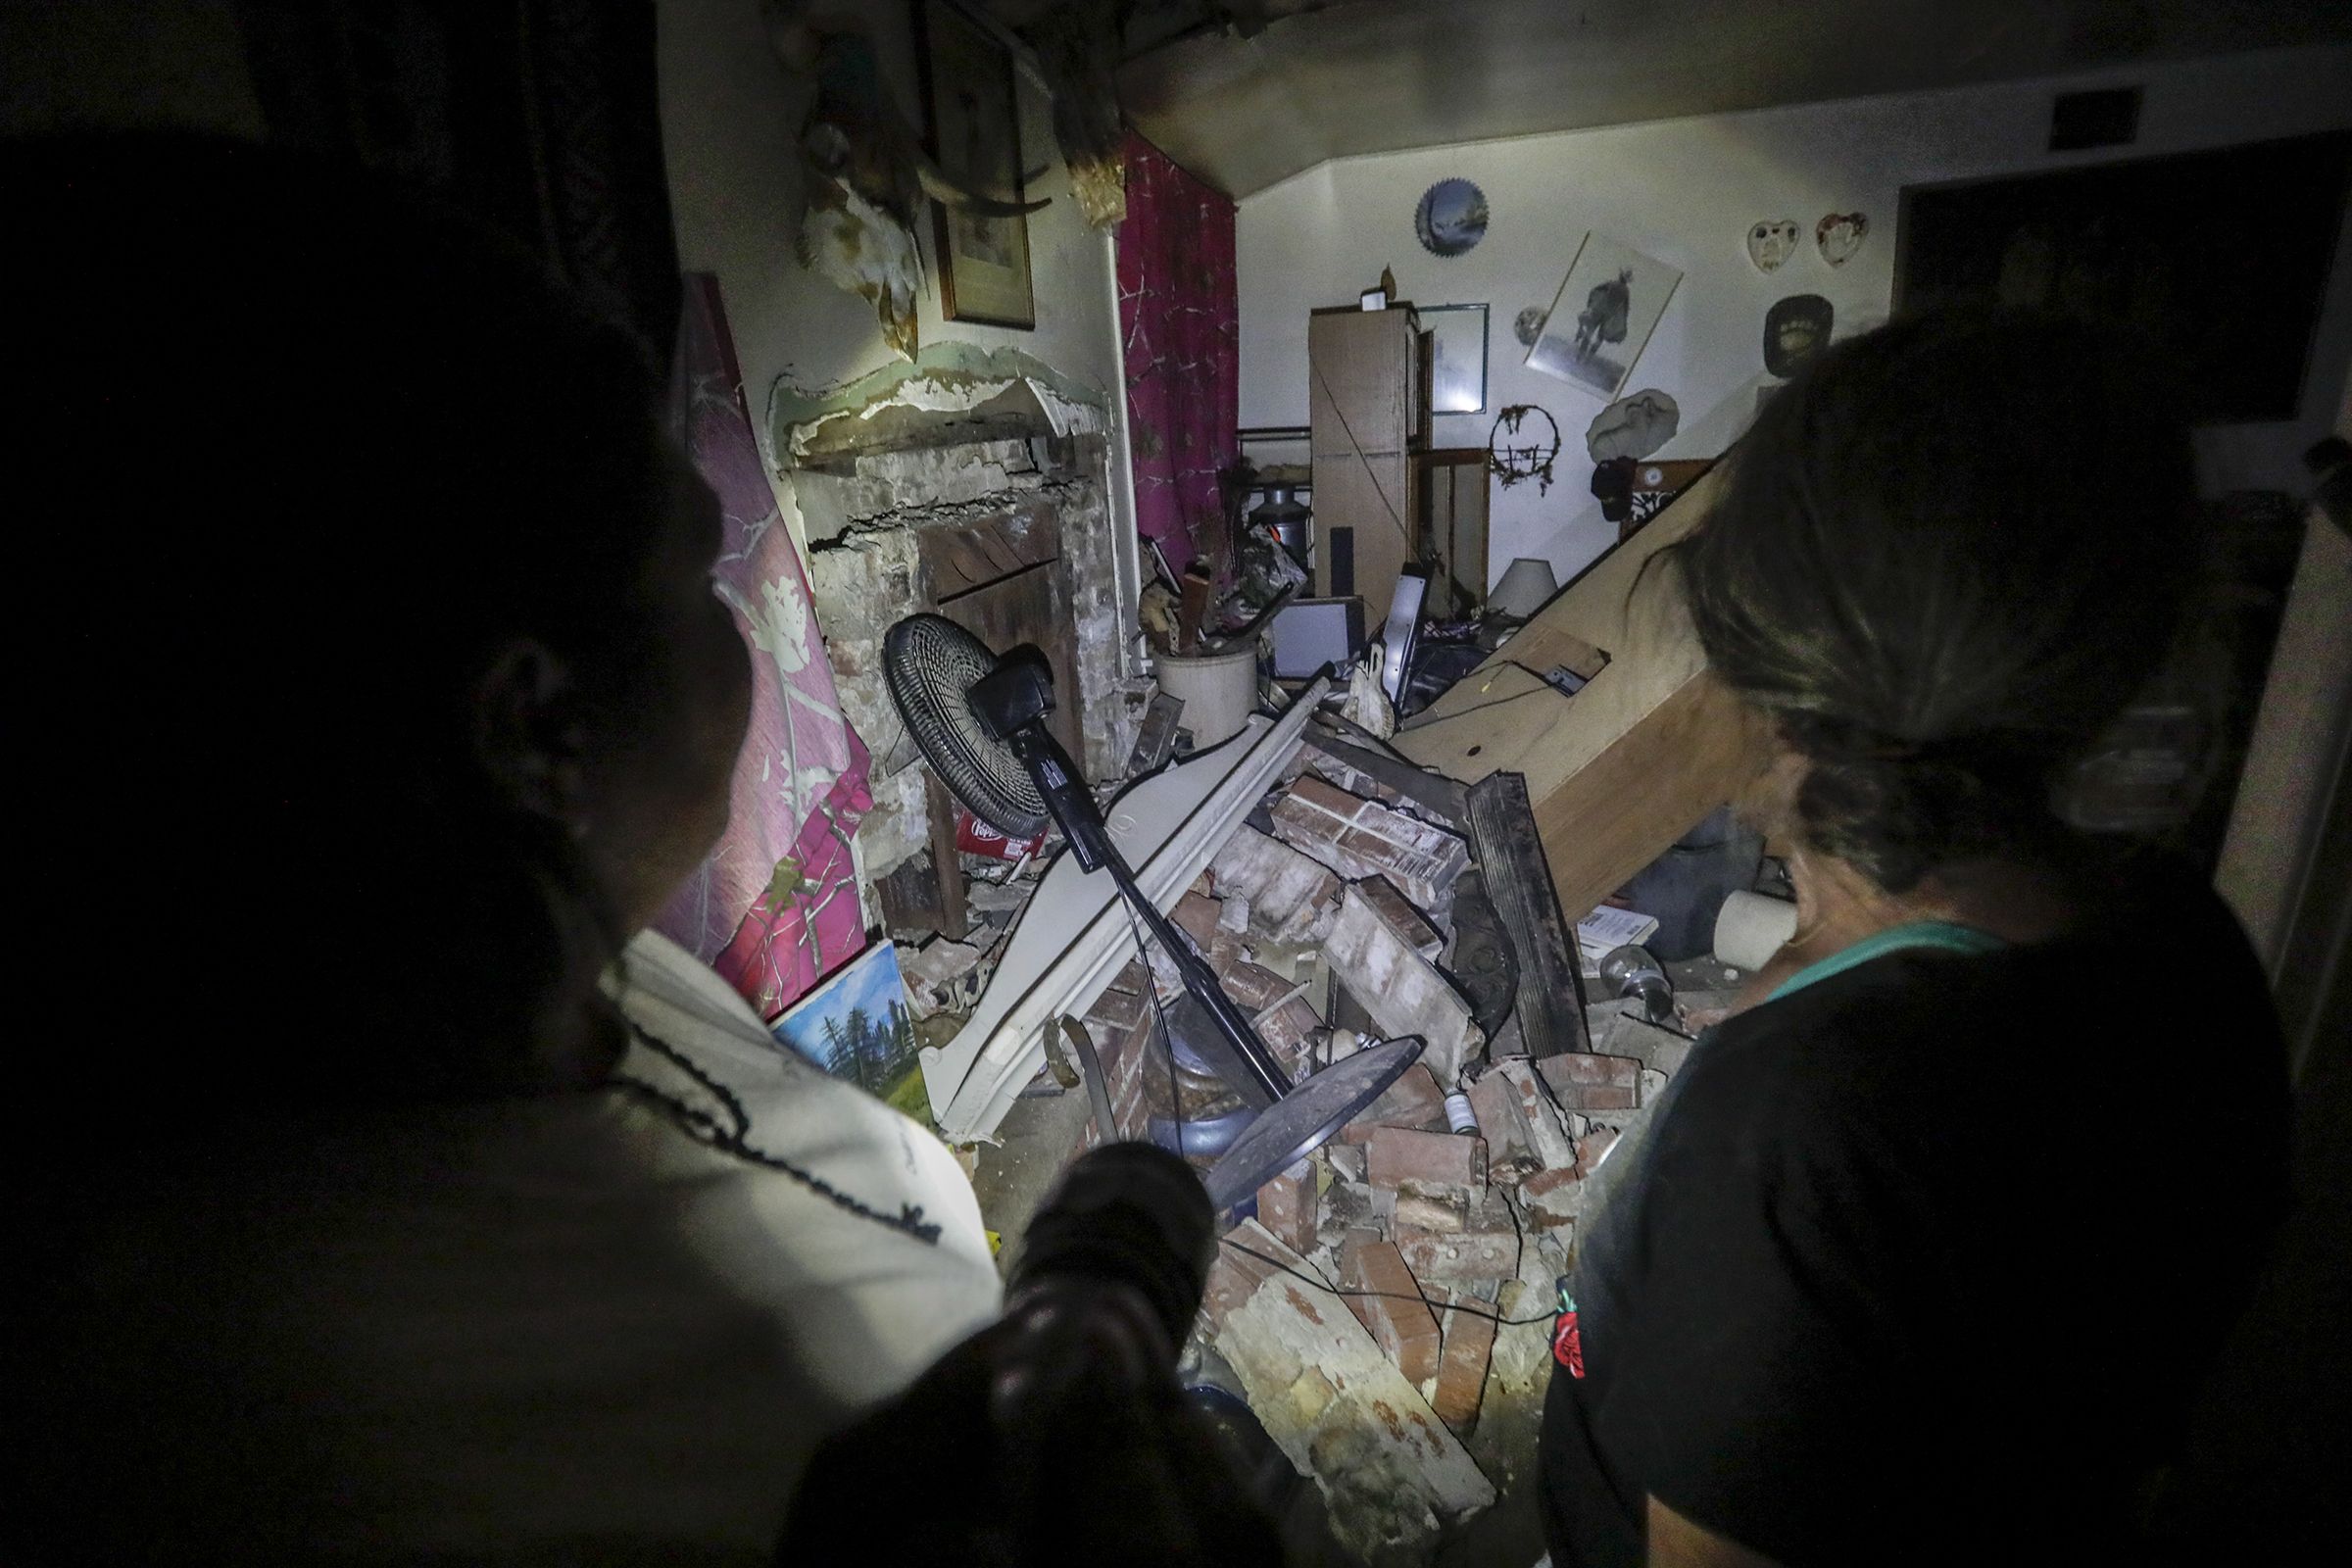 This image shows a flashlight being shown on the inside of a house in complete disarray. 